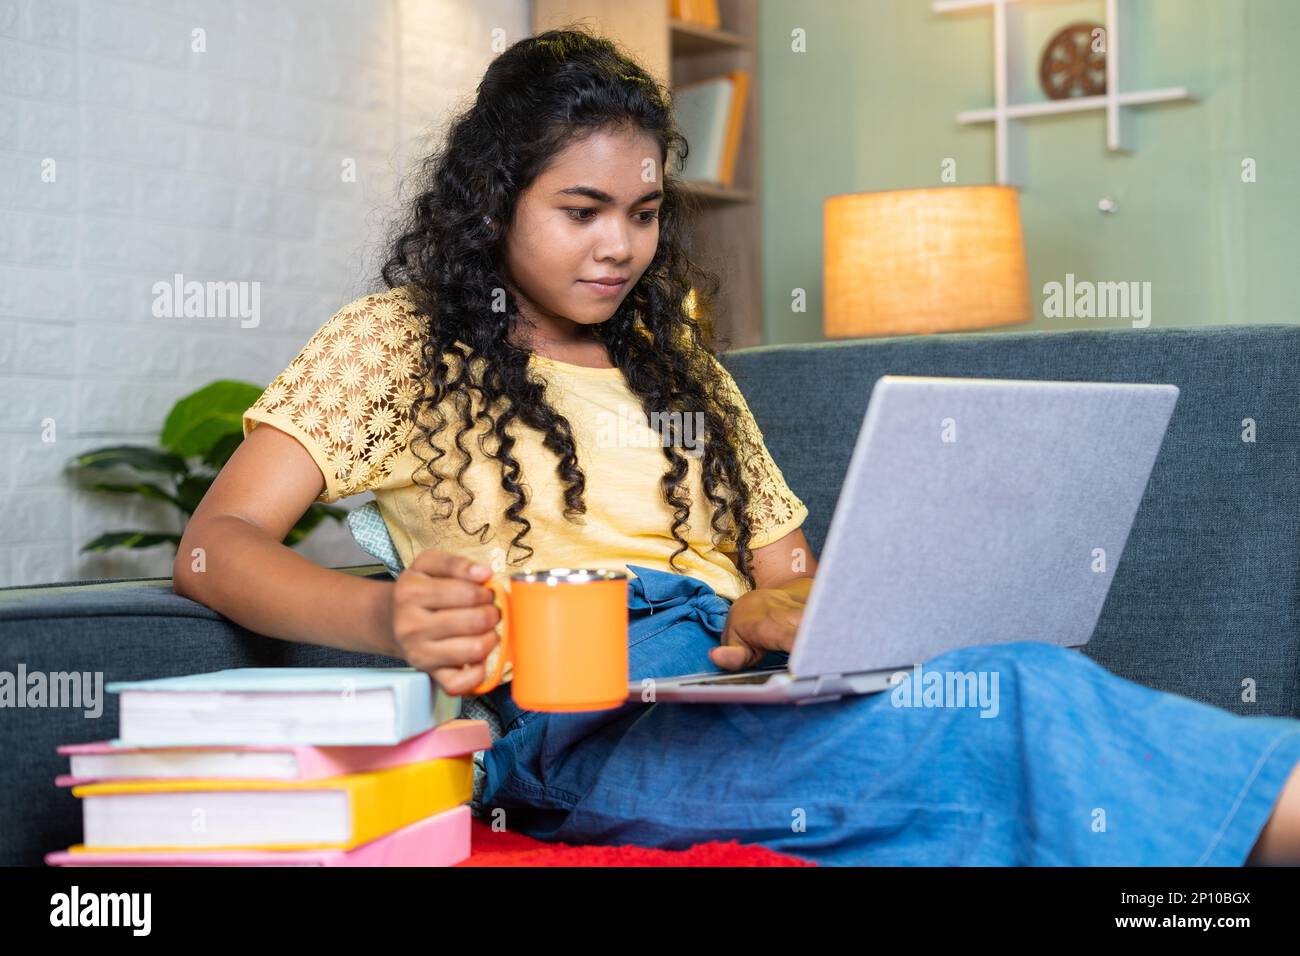 Young indian girl drinking coffee or tea while using laptop during examination while sitting on sofa at home with books - concept of refreshment Stock Photo